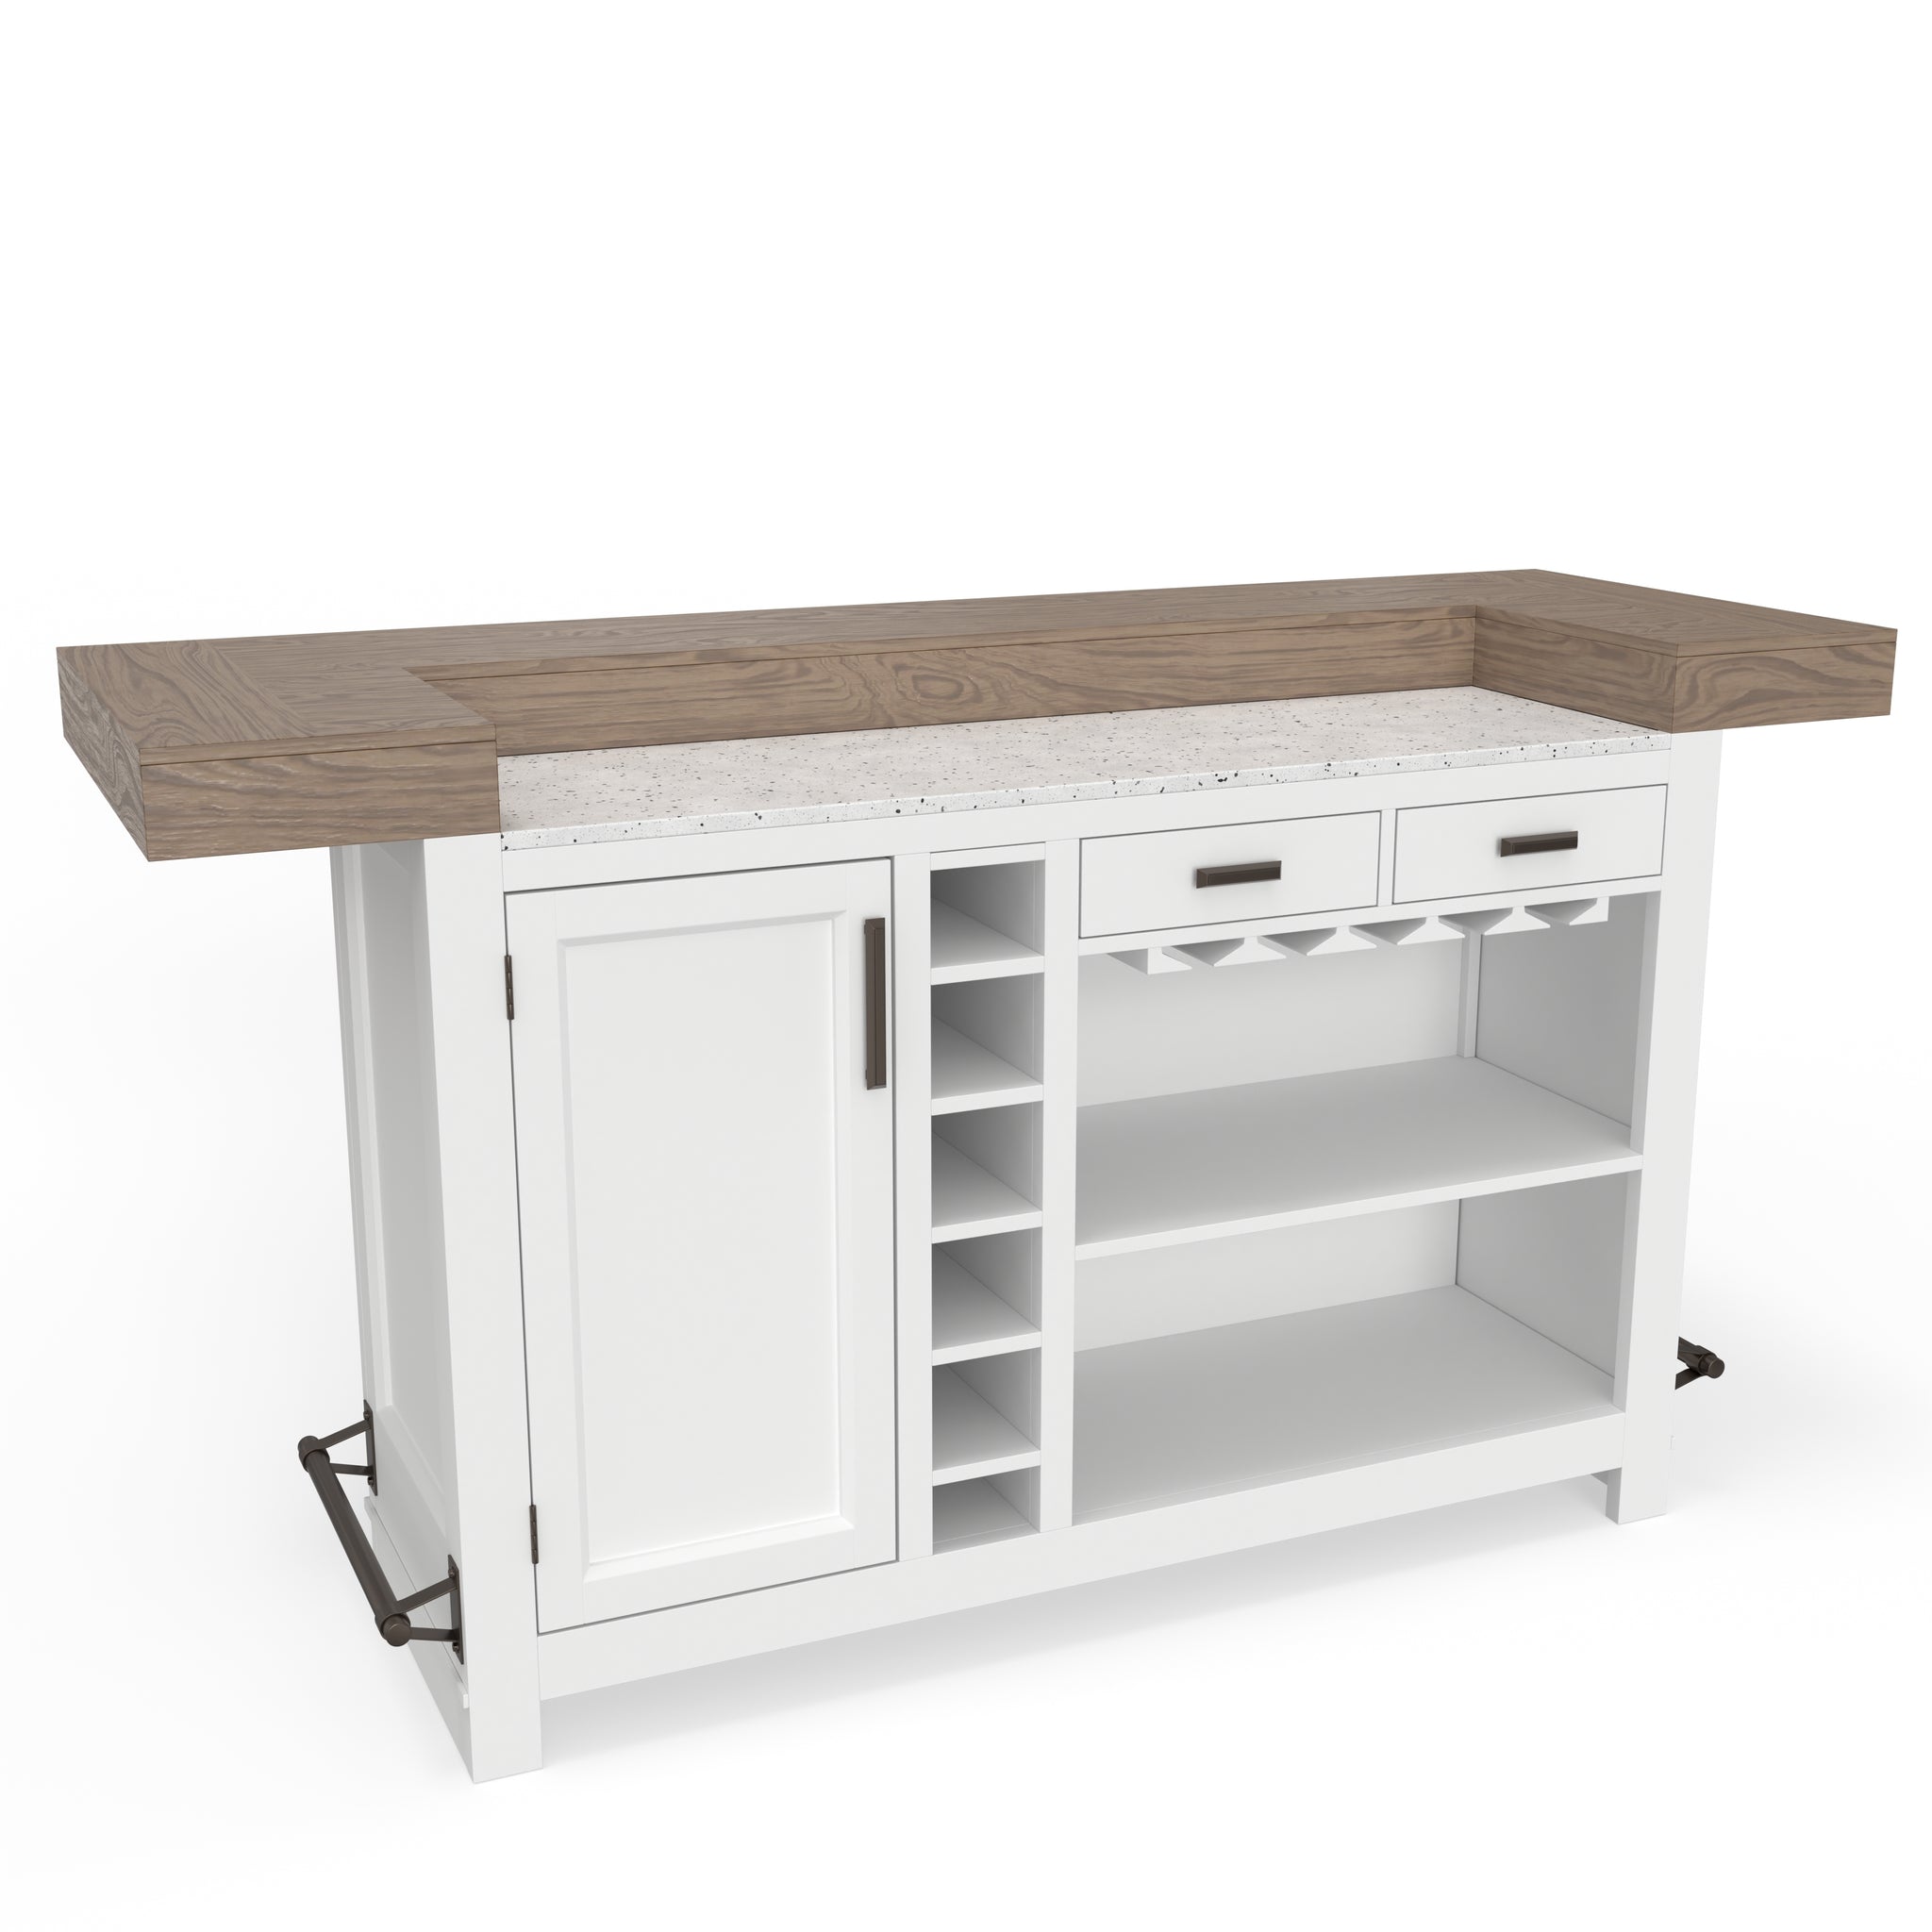 AMERICANA MODERN DINING Bar Complete 78 in. with quartz - Parker House  Furniture